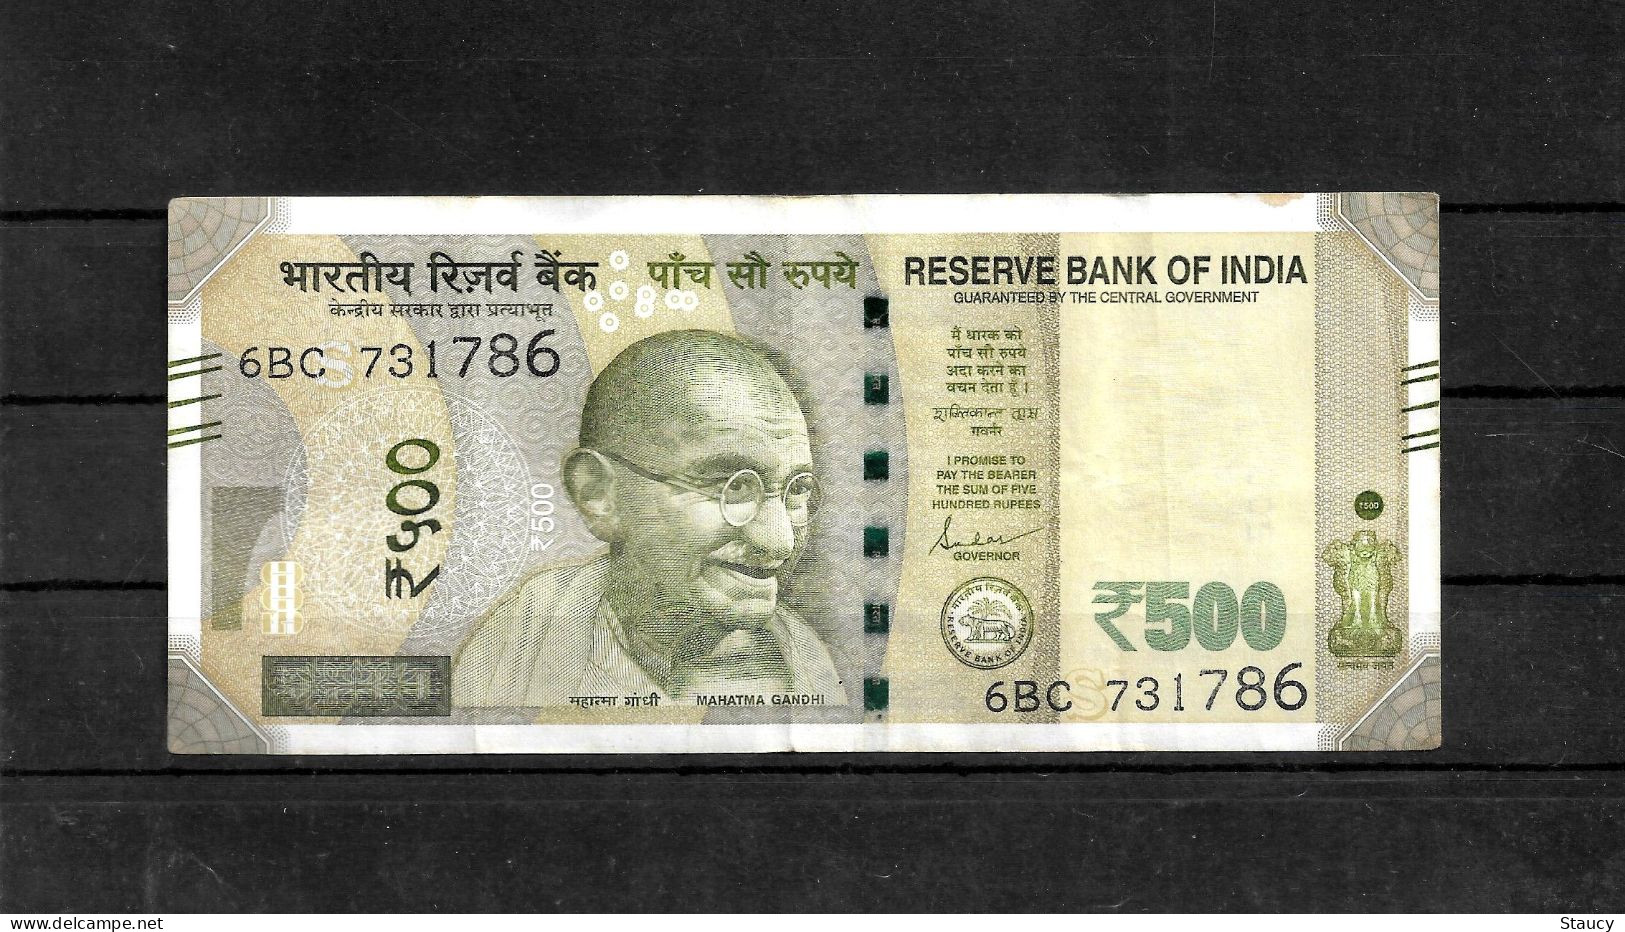 INDIA 2020 Rs. 500.00 Rupees Note Fancy / Holy / Religious Number "786" 731786" USED 100% Genuine Guaranteed As Per Scan - Andere - Azië